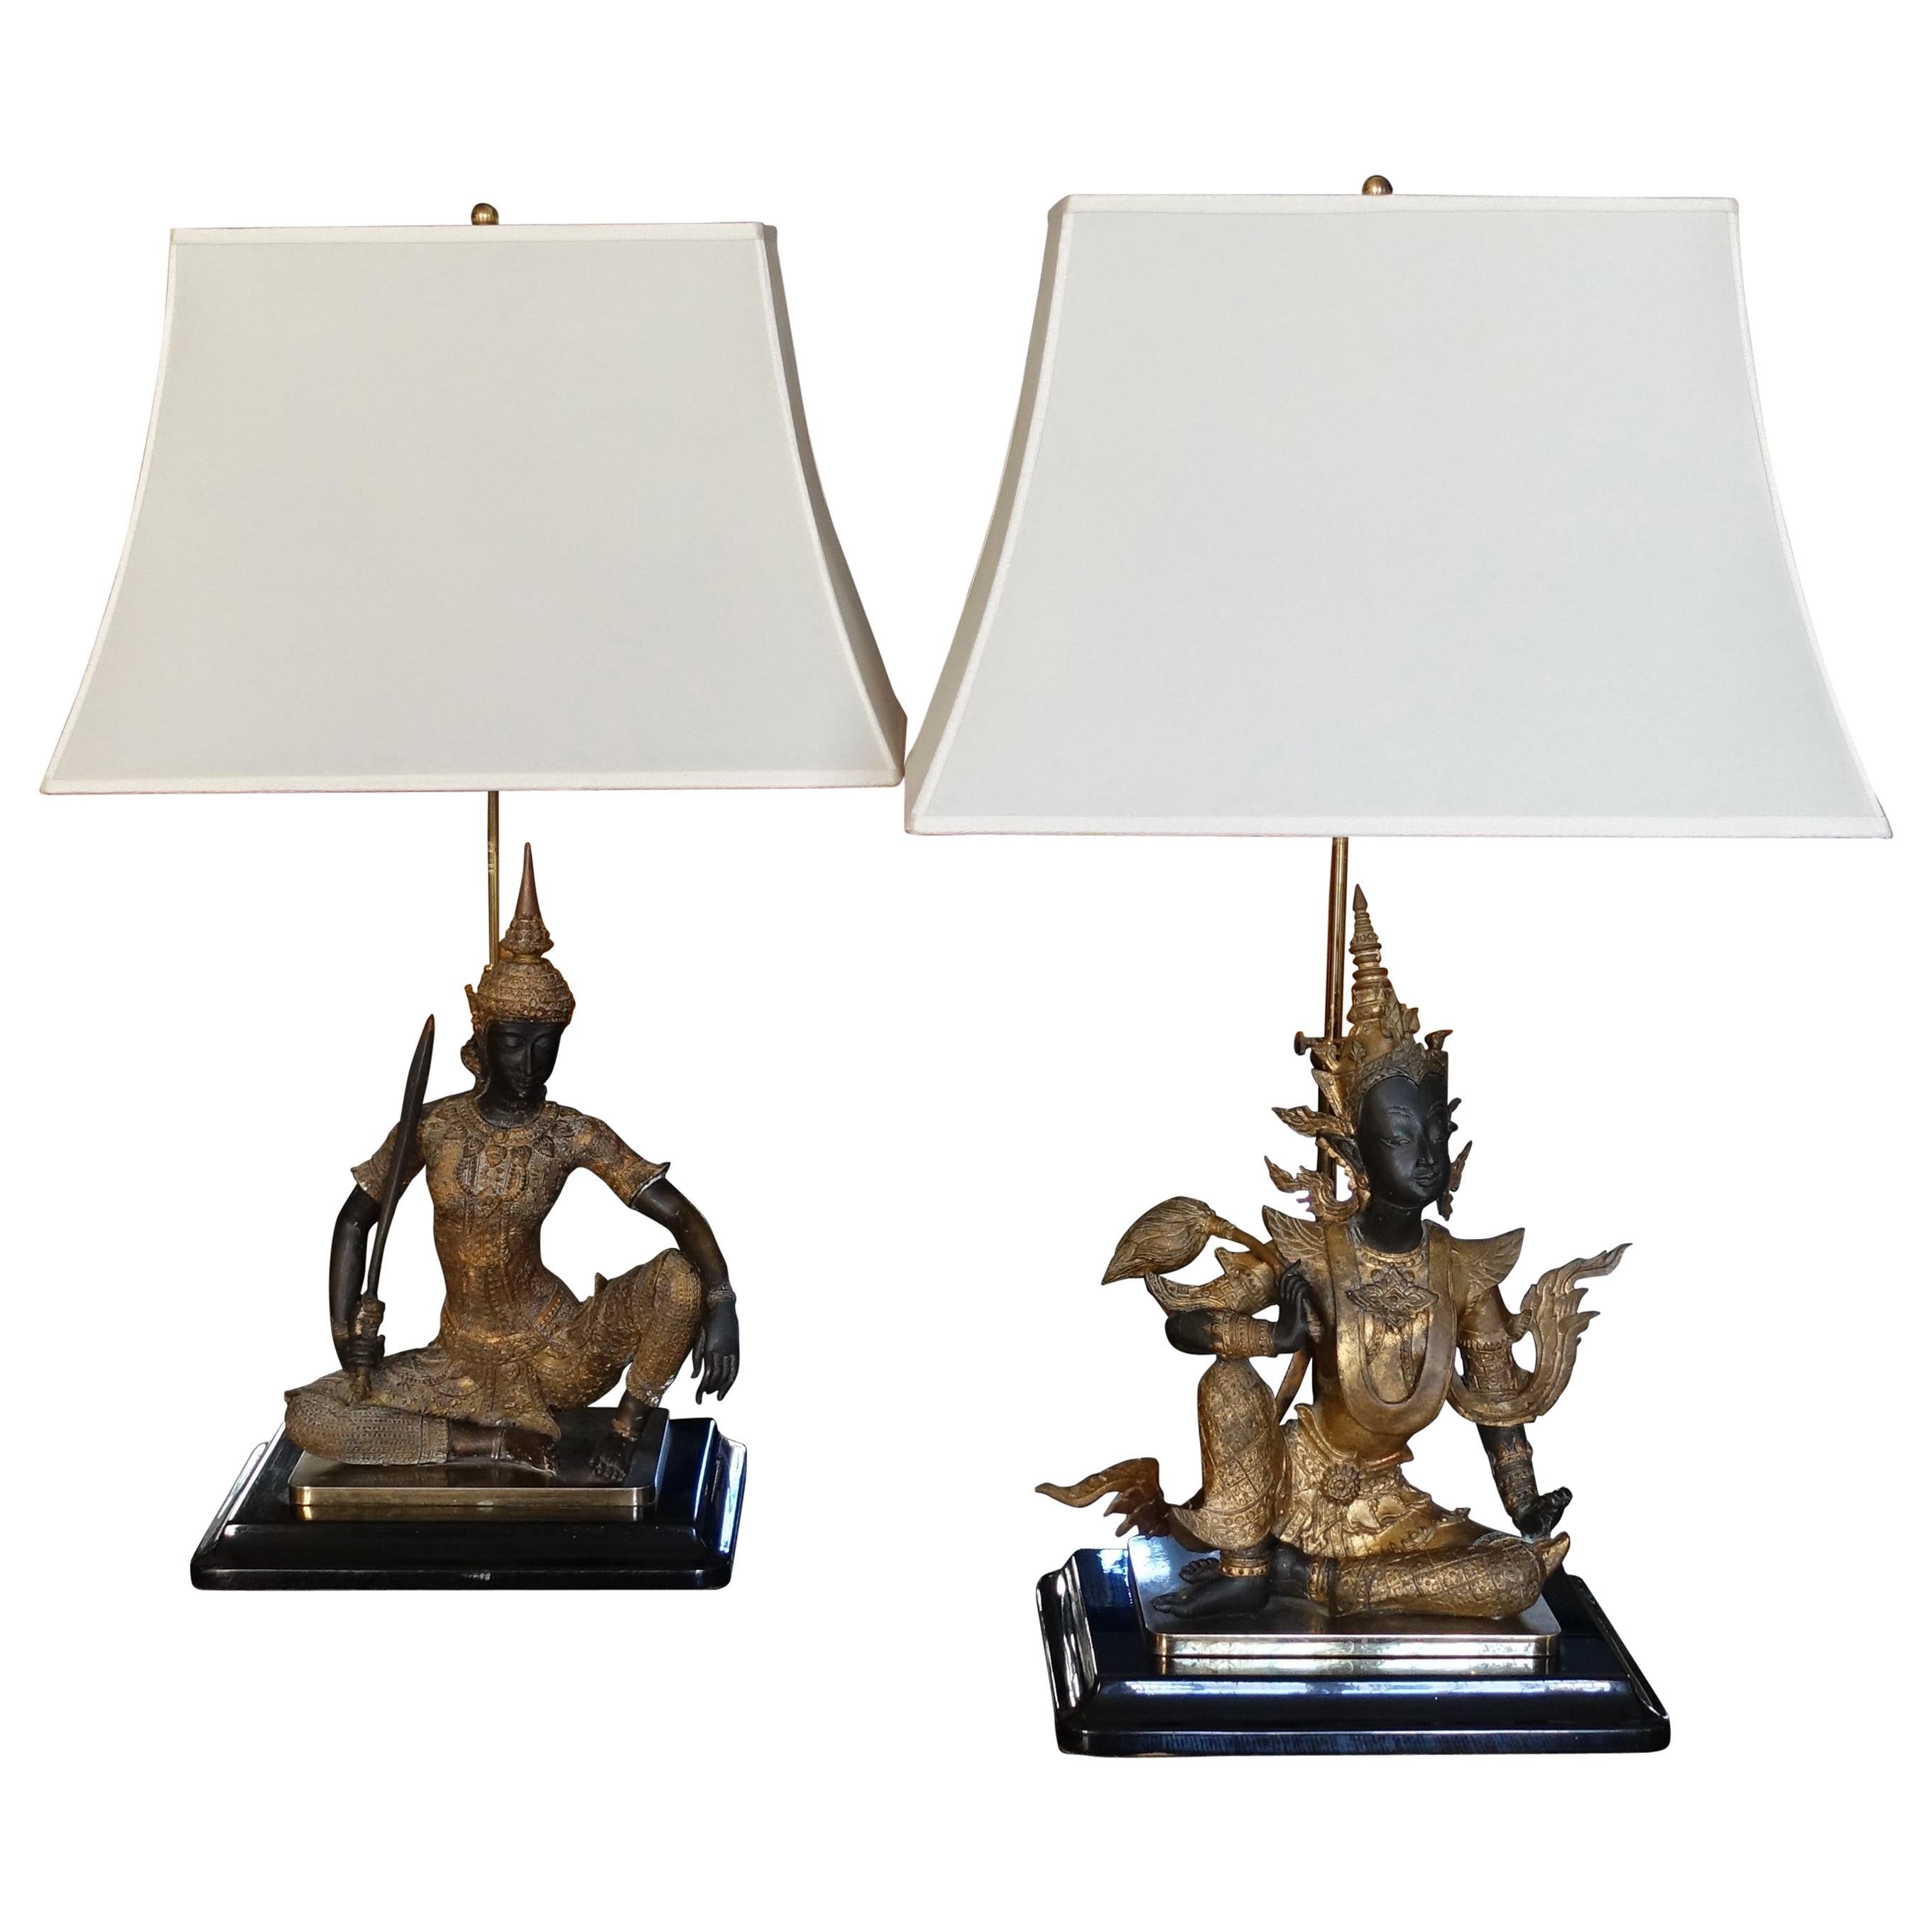 1960s French Brass Buddha Statues Pair of Table Lamp, Black Wood Base